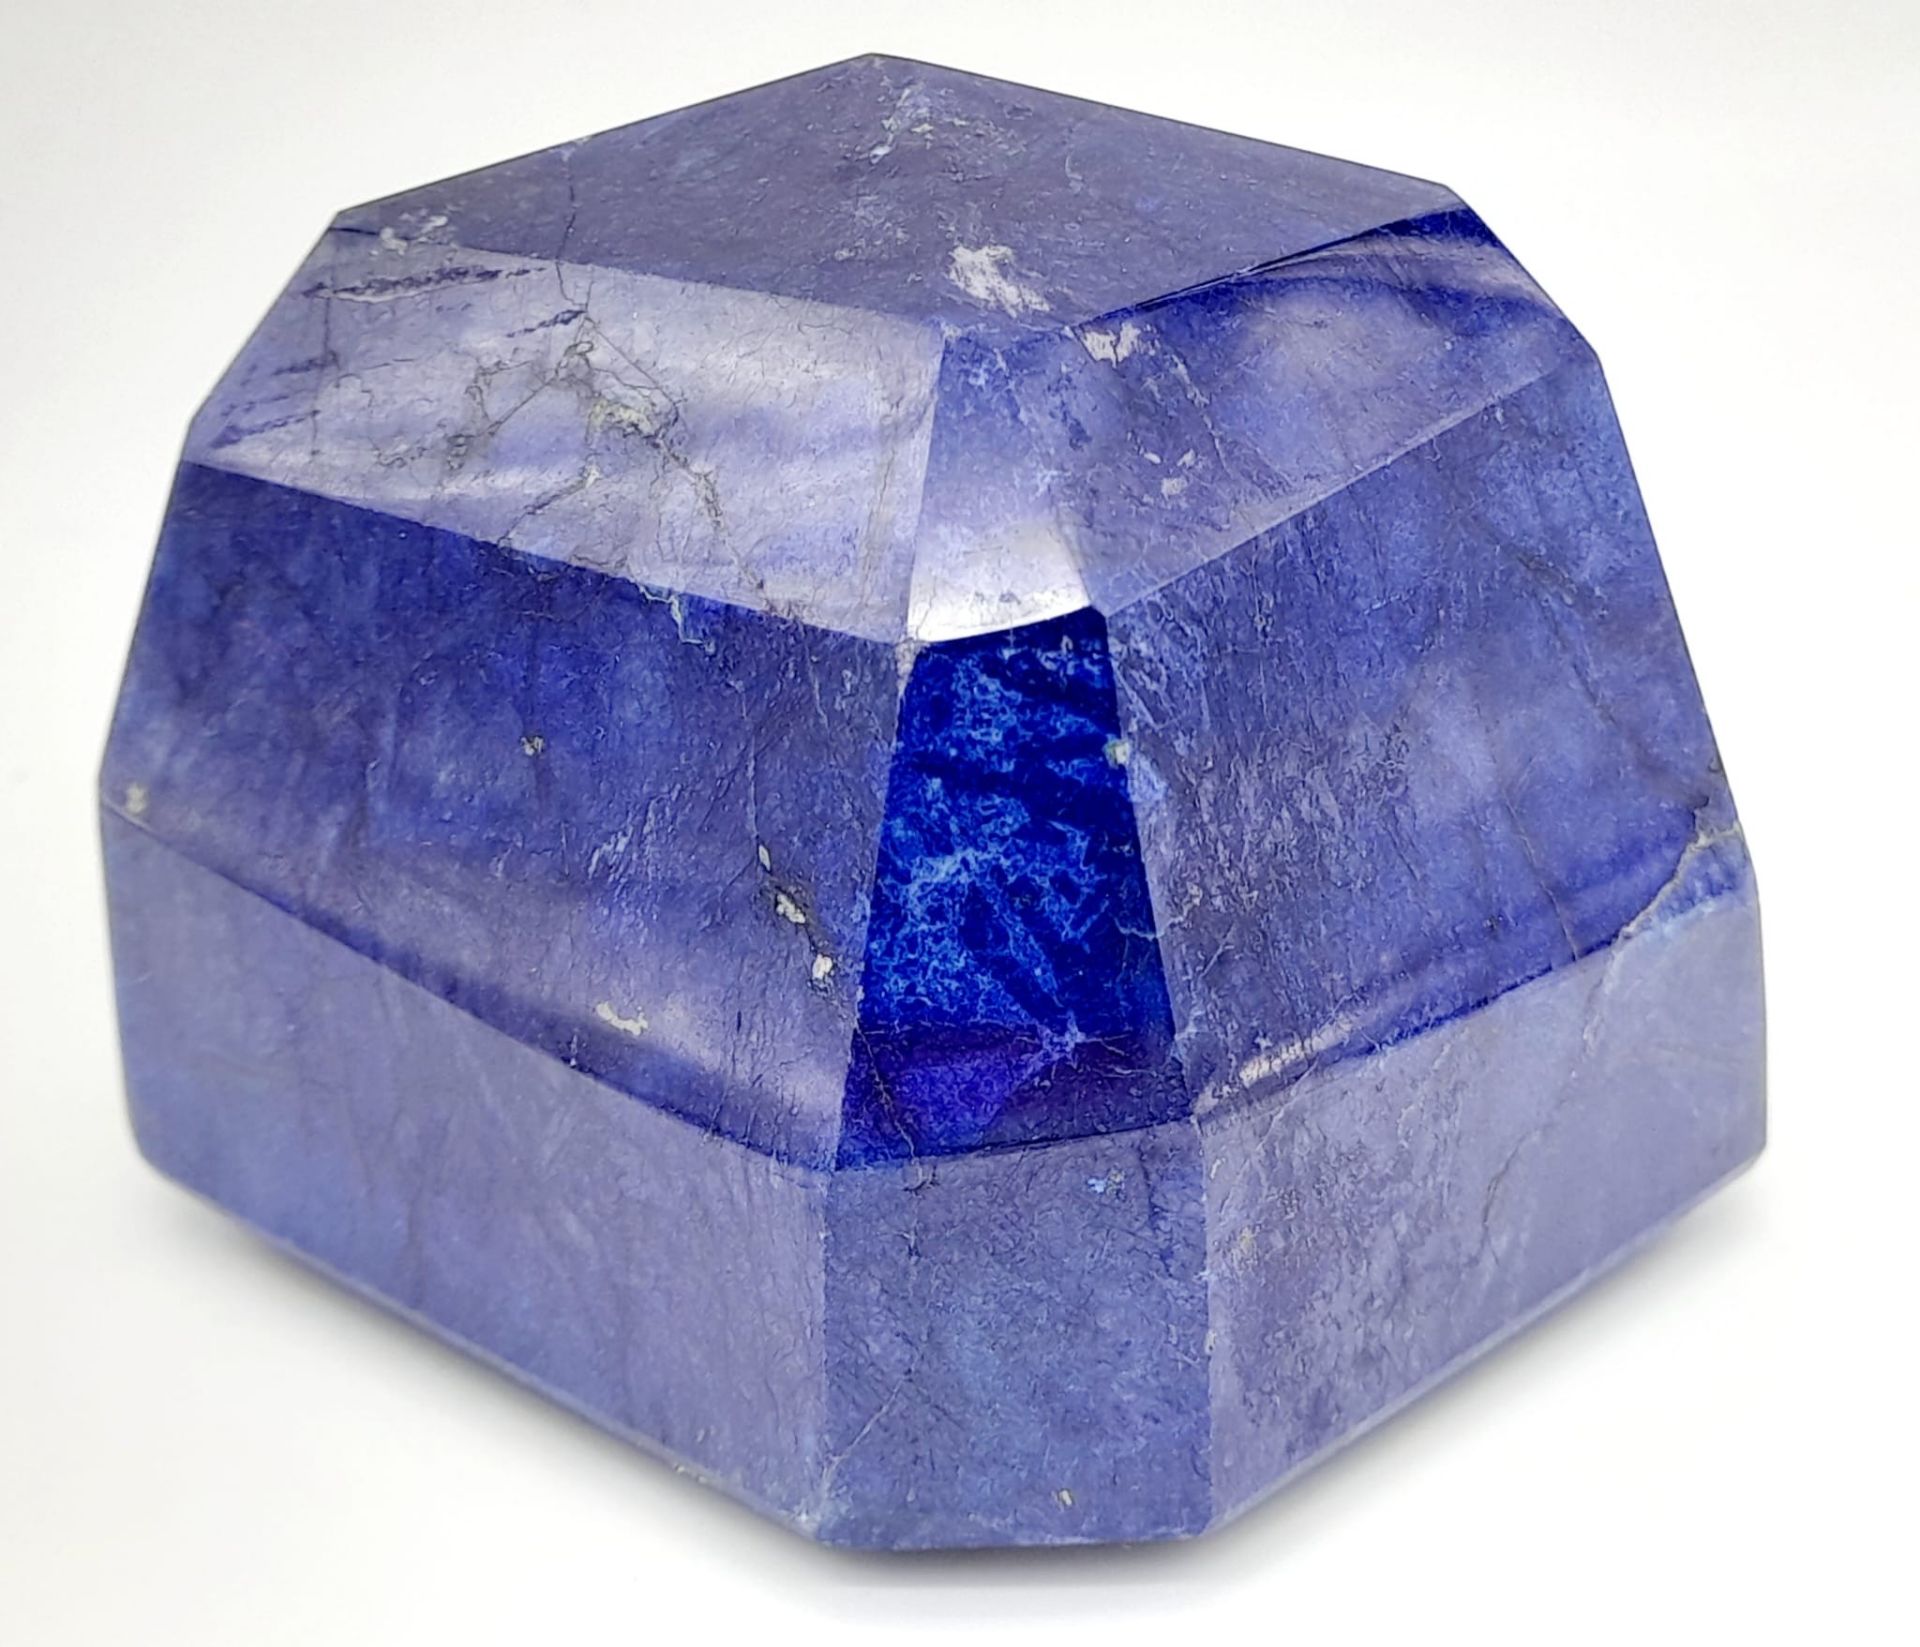 A 4230ct Rare Natural Blue Sapphire, Octagonal Shape. Comes Complete with GLI Certificate. - Image 8 of 8